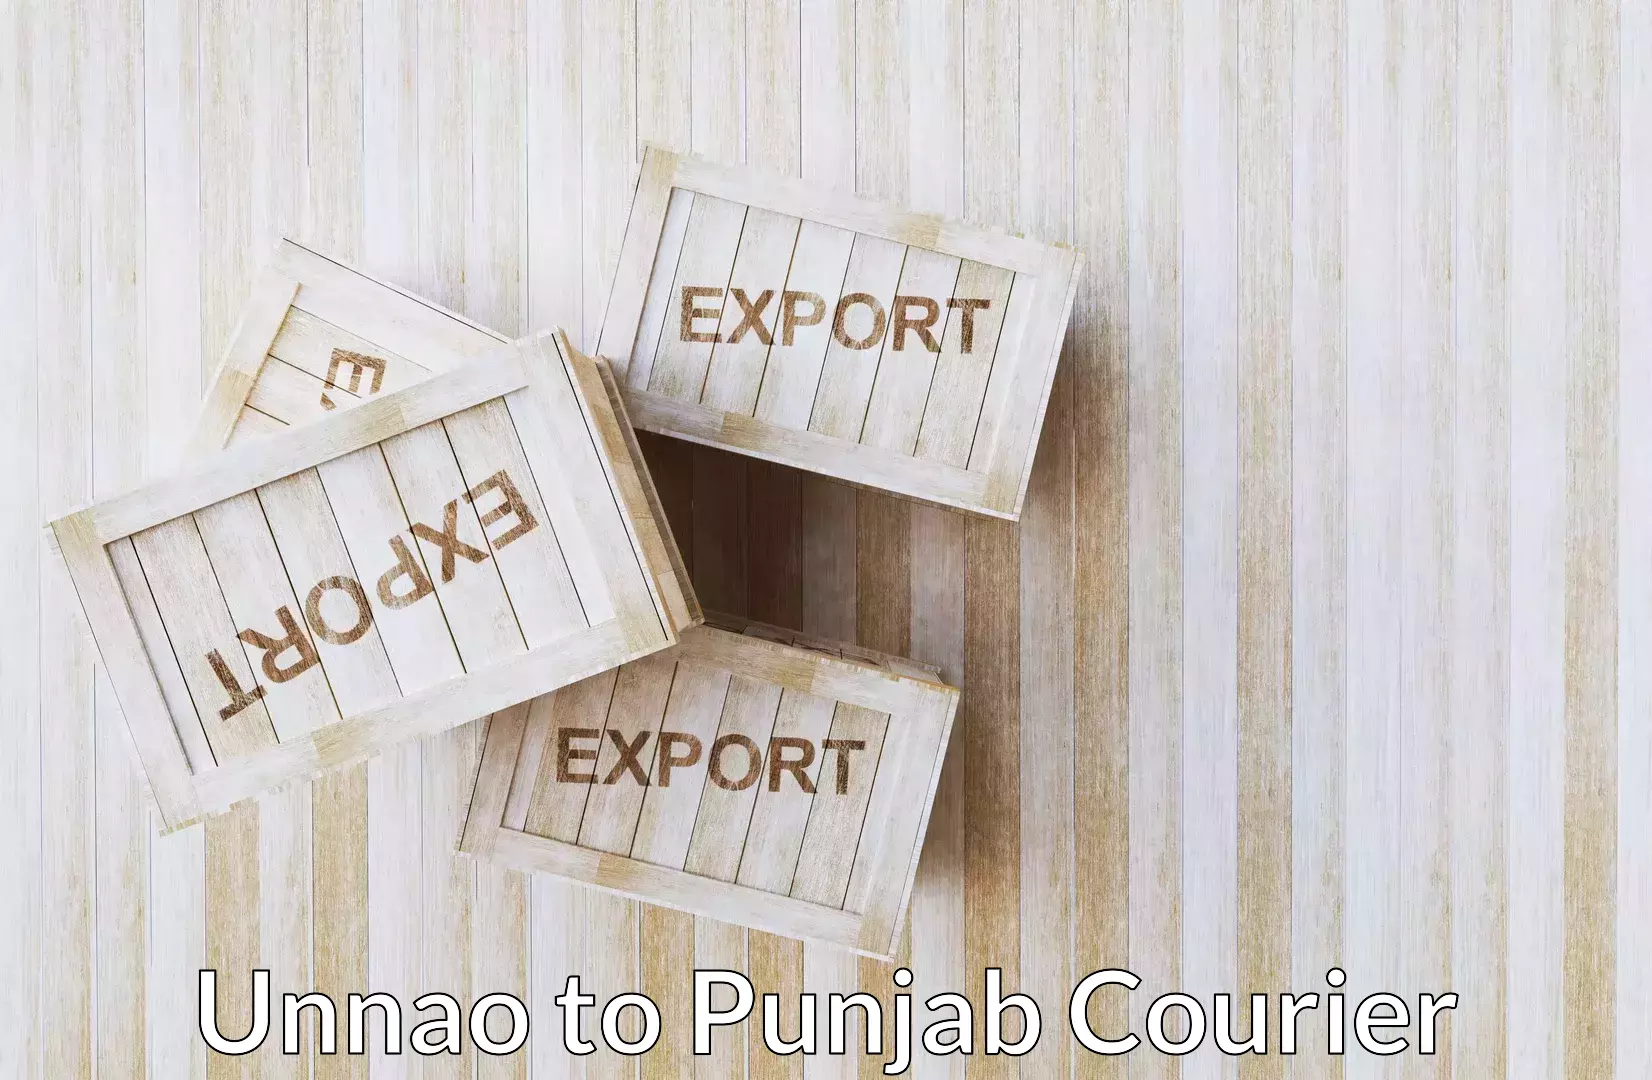 Luggage transport consultancy Unnao to Punjab